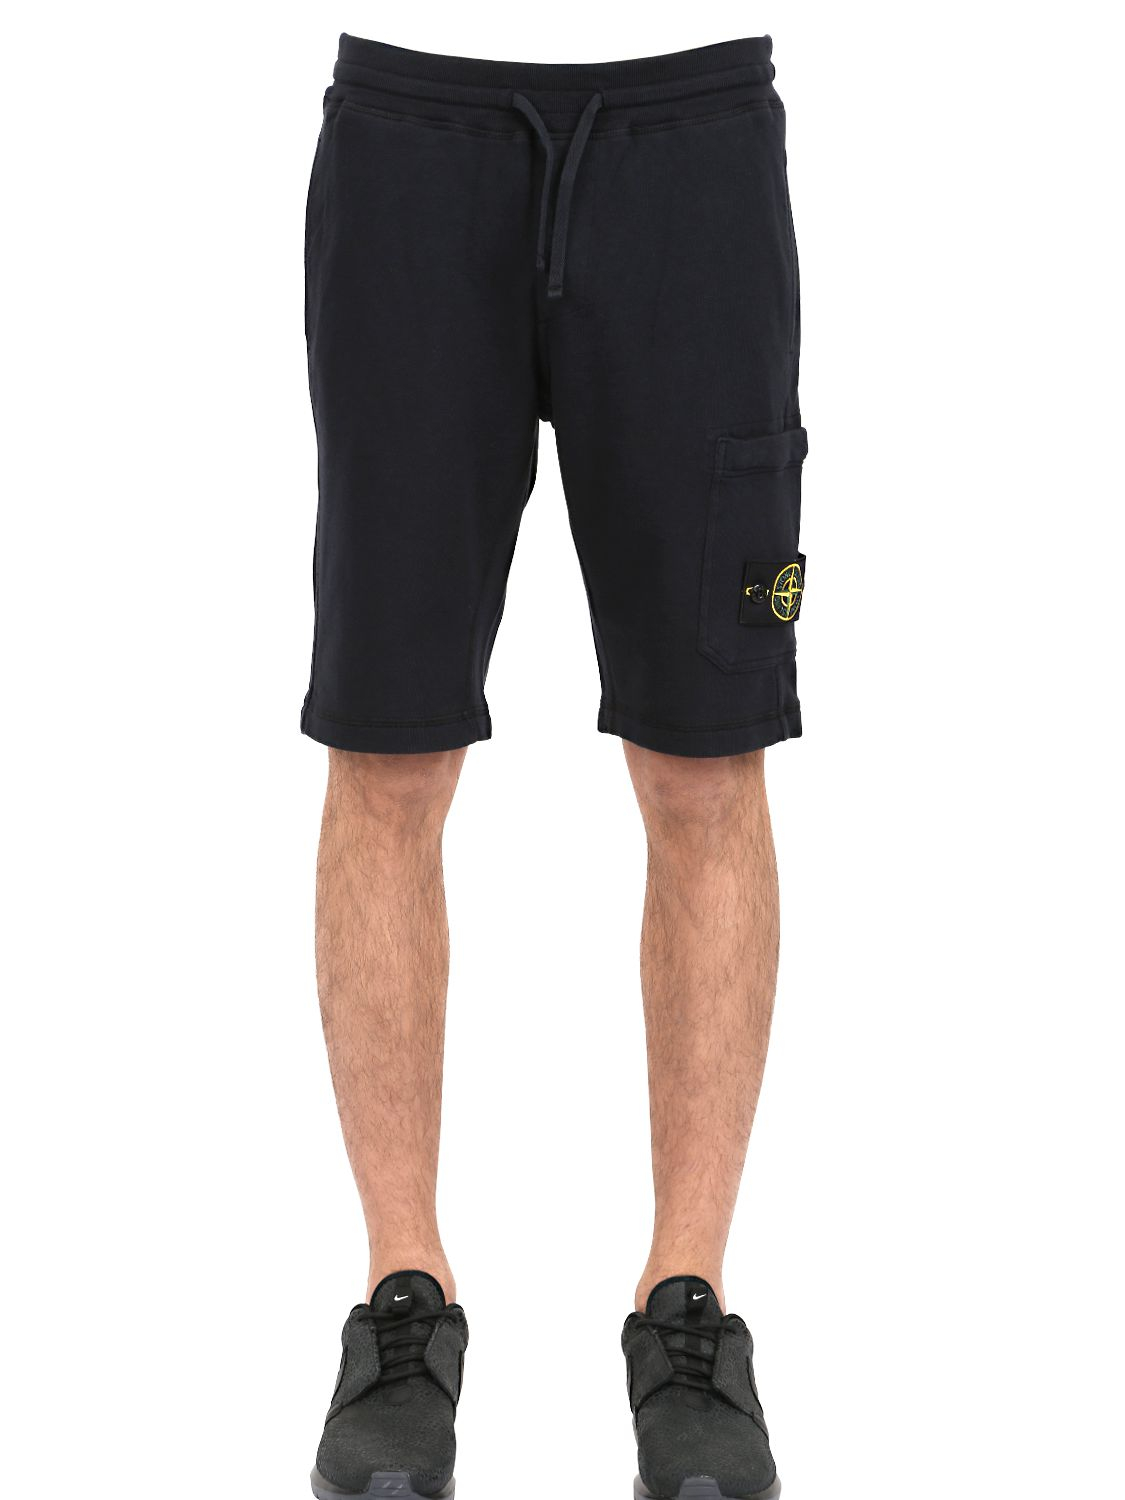 Stone Island Garment Dyed Cotton Jogging Shorts in Navy (Blue) for Men -  Lyst